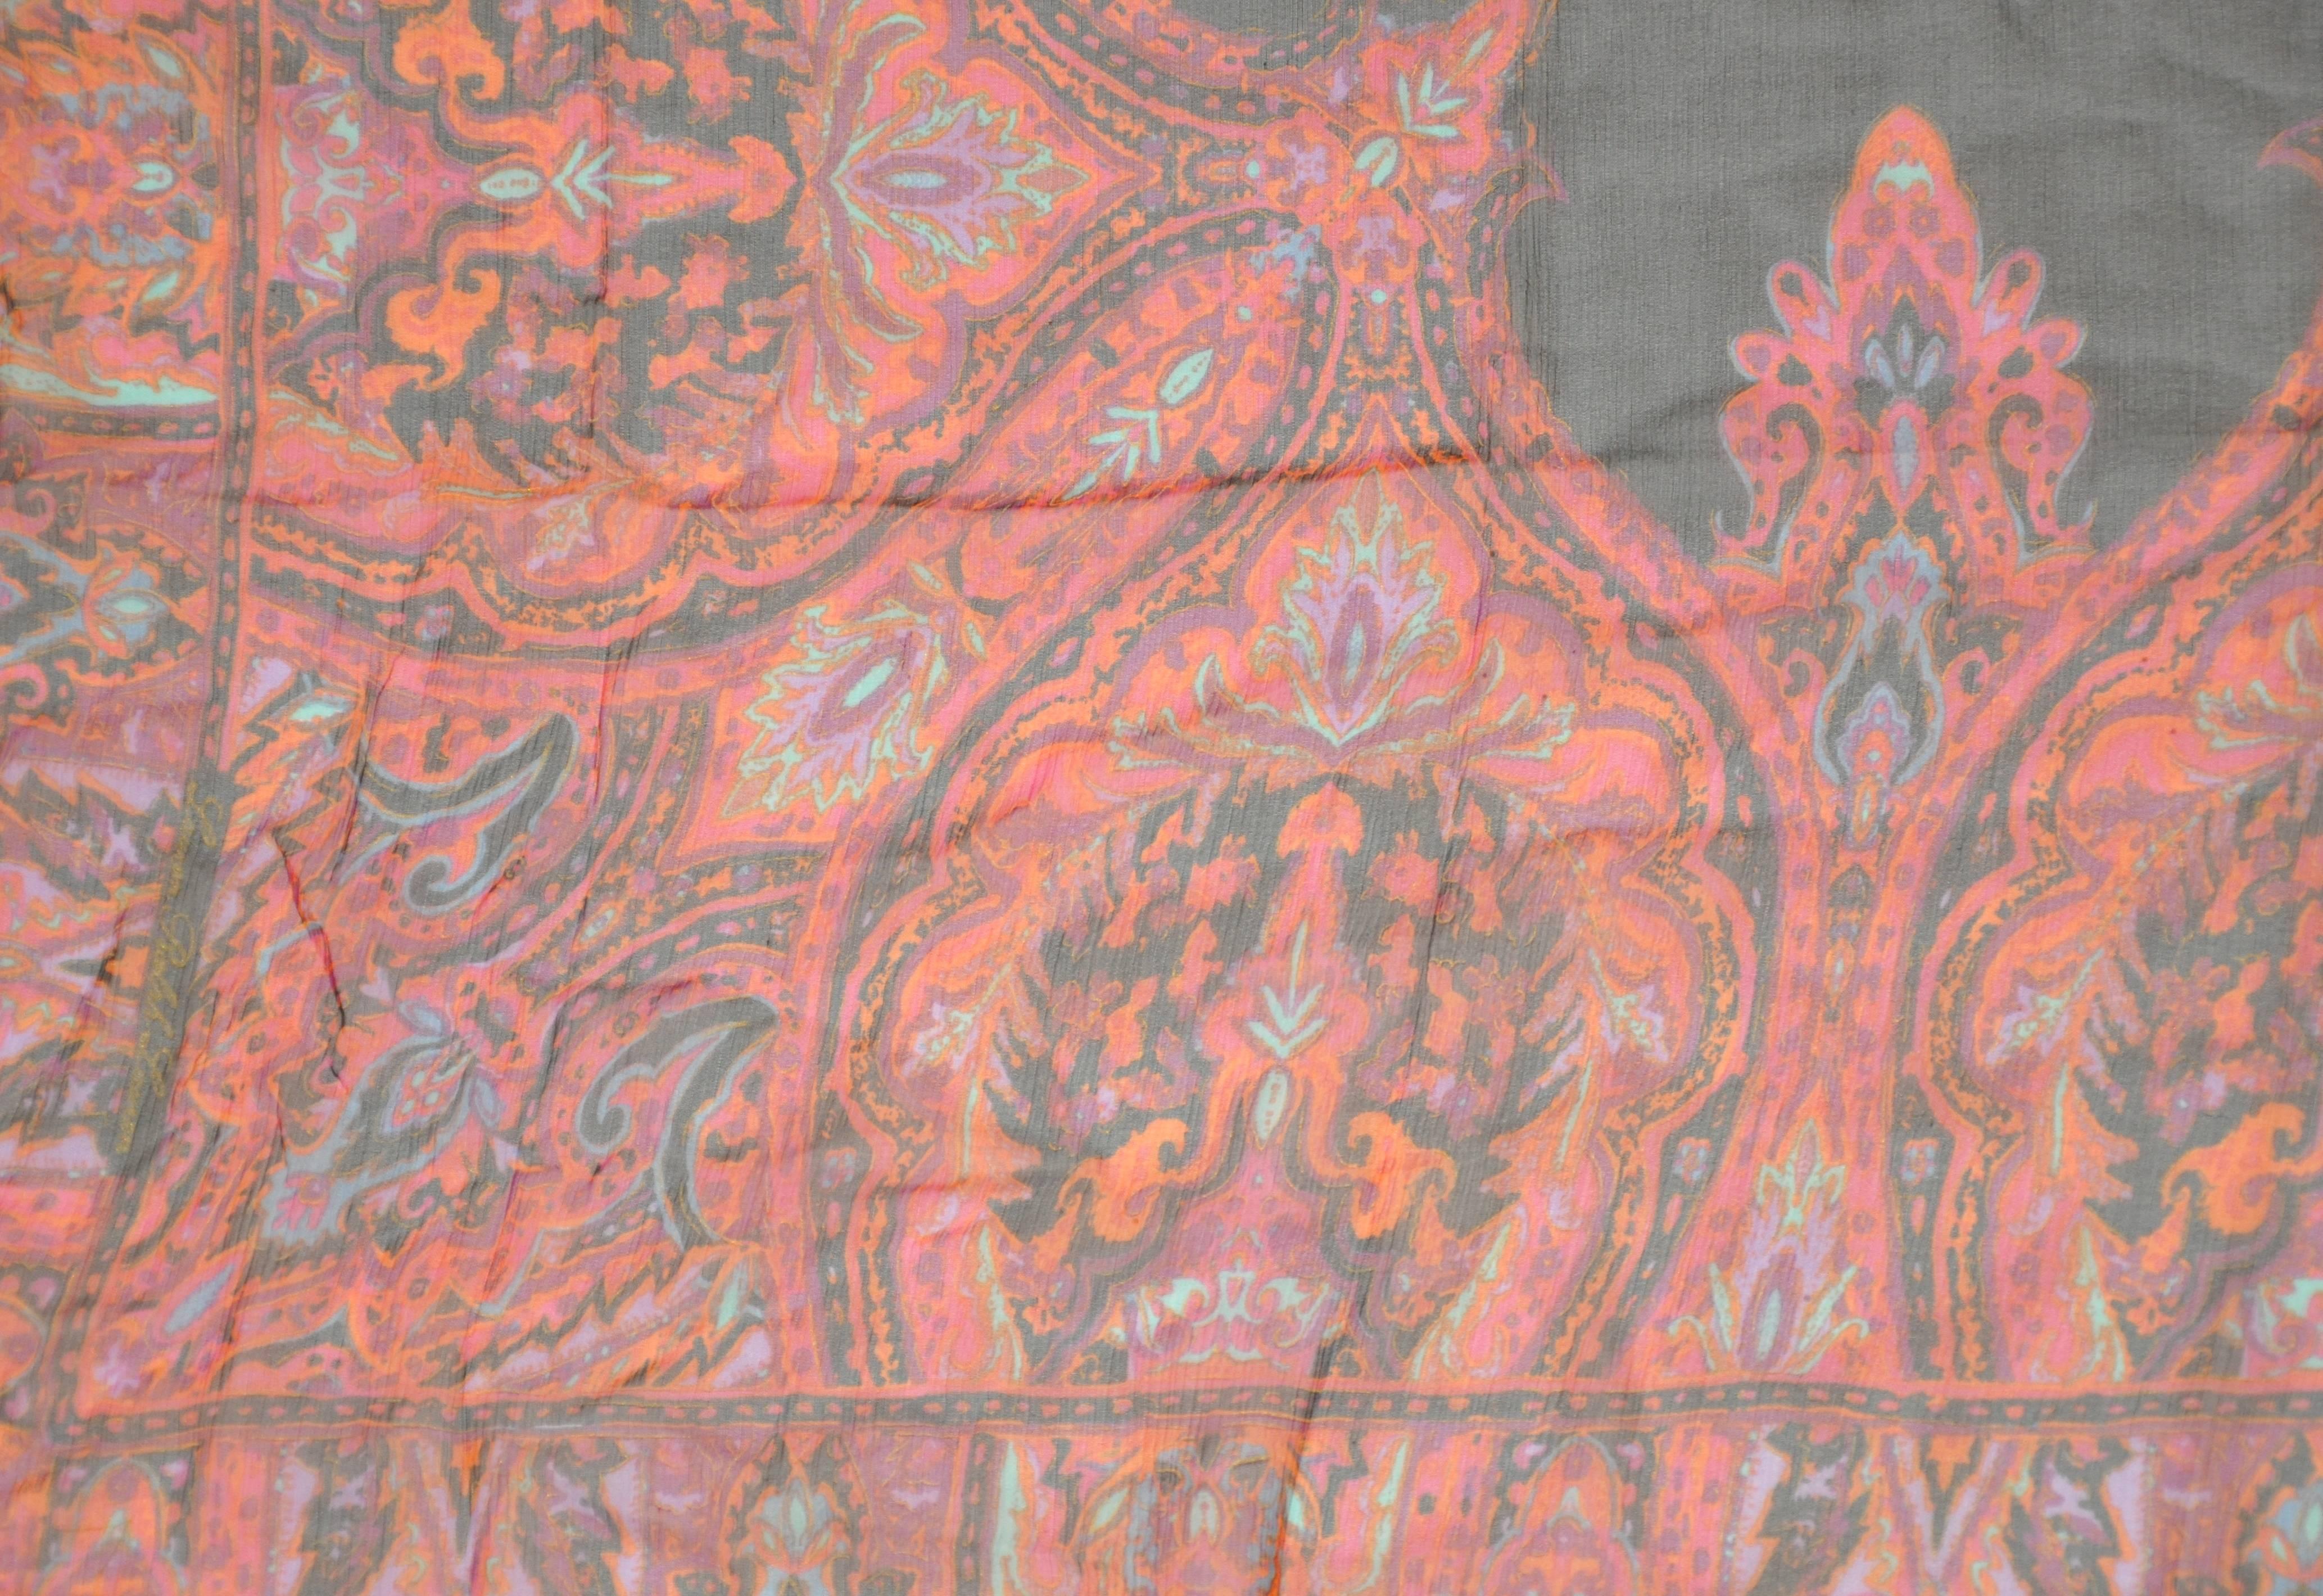        Ralph Lauren multi-colored fringed paisley borders accenting a black center silk chiffon scarf measures 39 inches by 44 inches. Made in Italy.